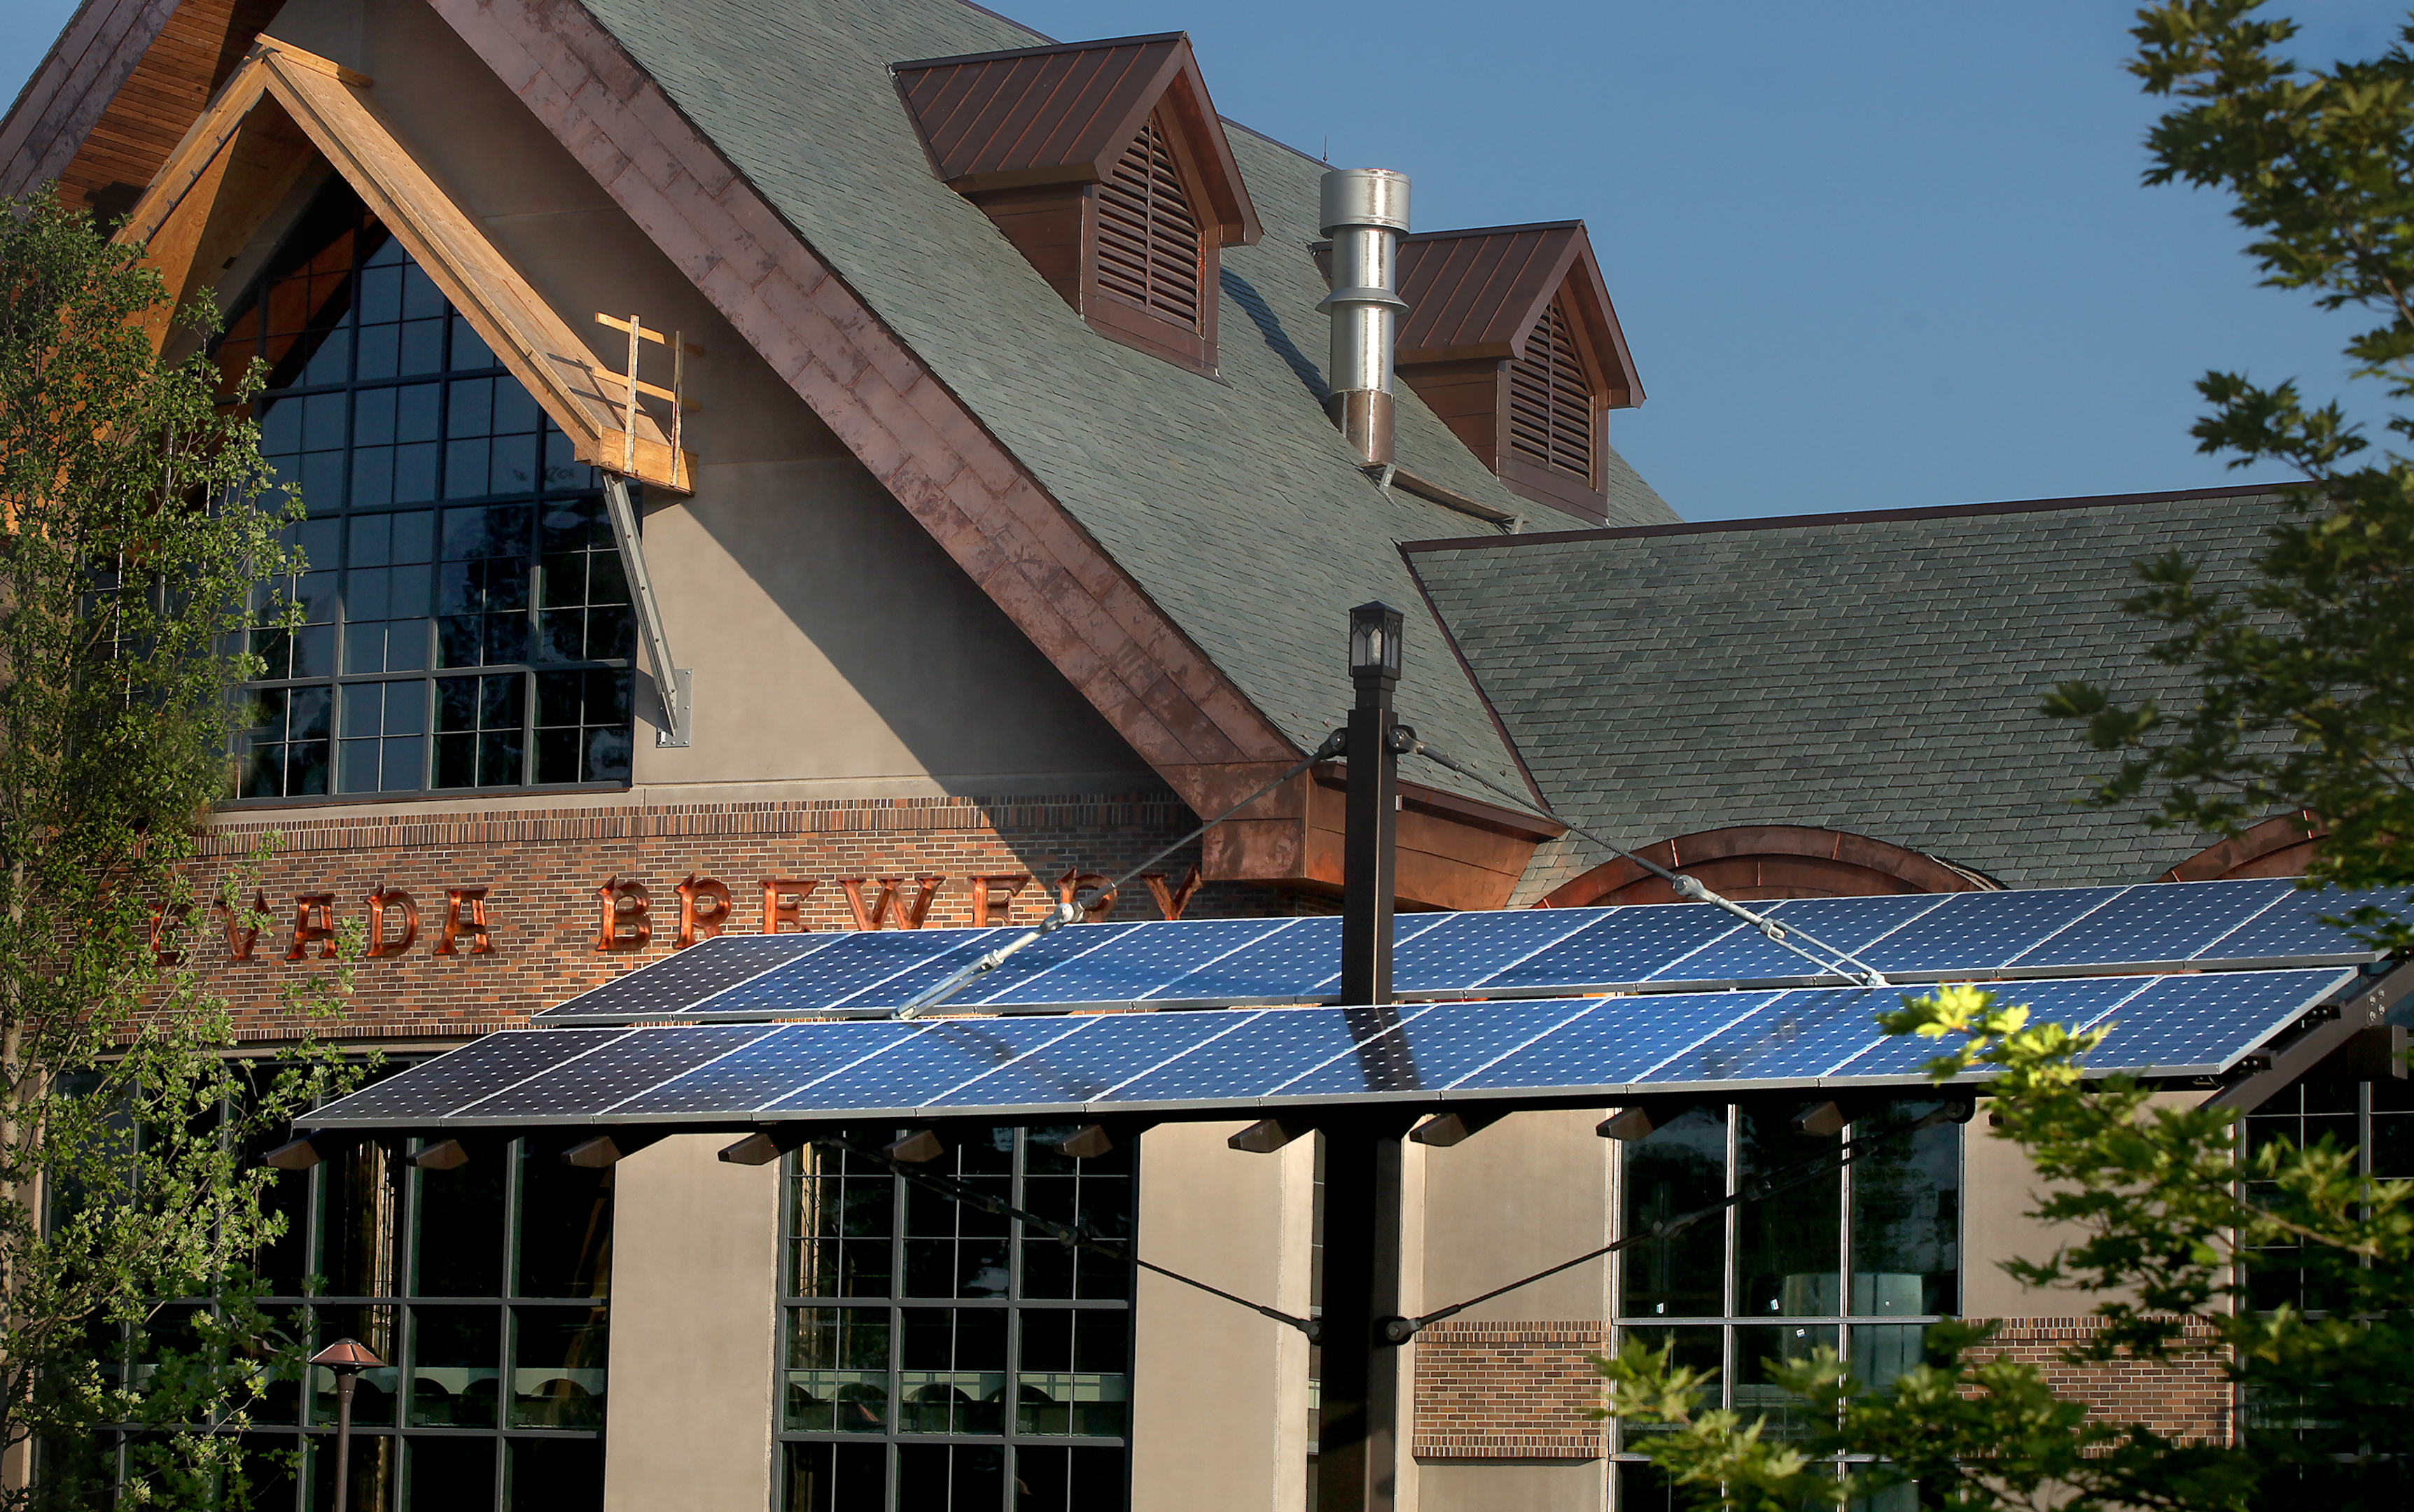 Solar panels at Sierra Nevada Brewing in Mills River, NC. Installed by Sundance Power Systems